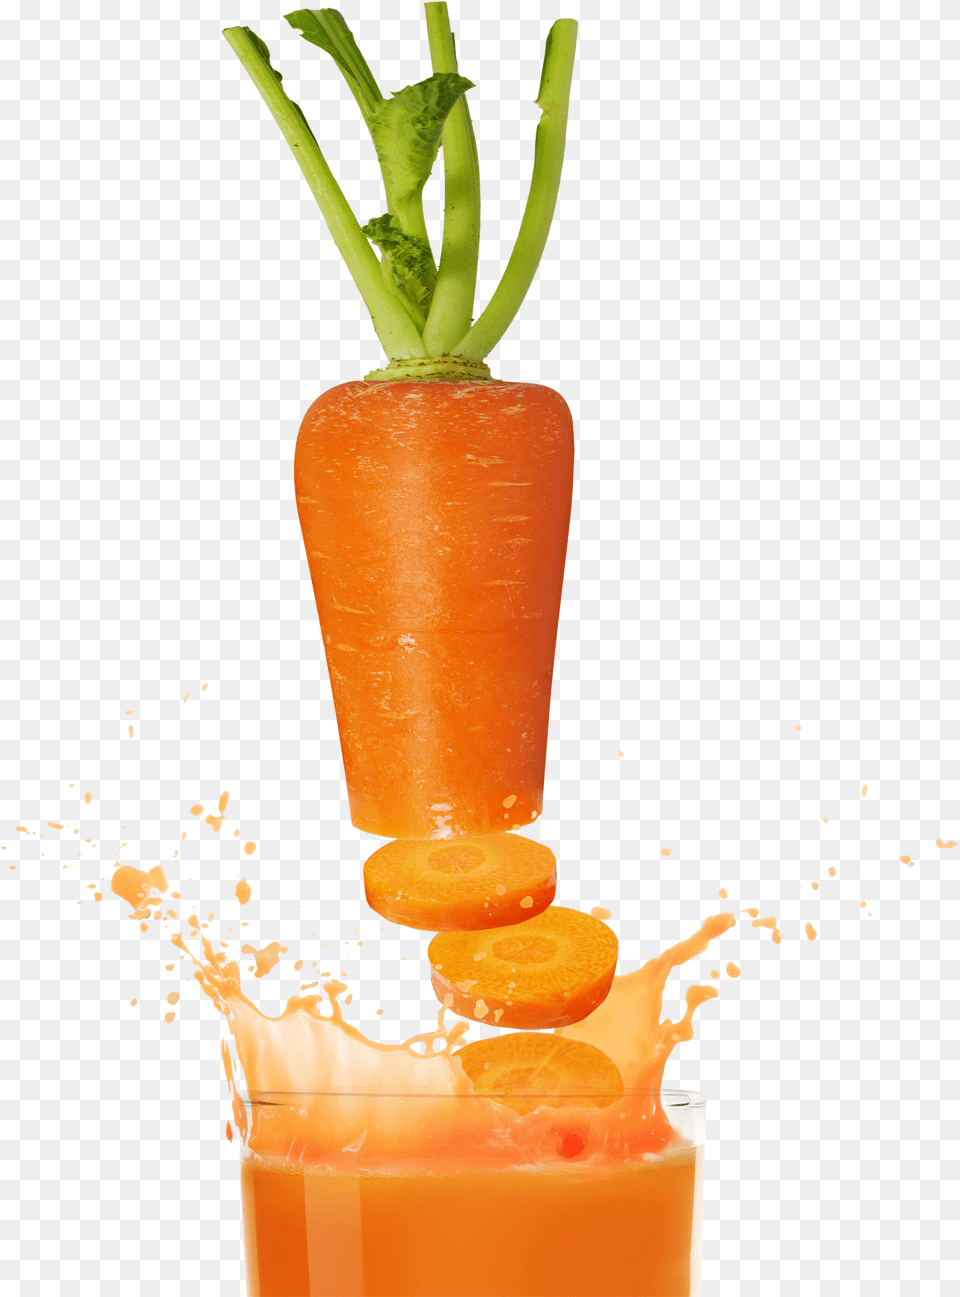 Carrots Juicy Image Black And White Stock Juicing Fasting And Detoxing For Life Unleash S, Beverage, Carrot, Food, Juice Png